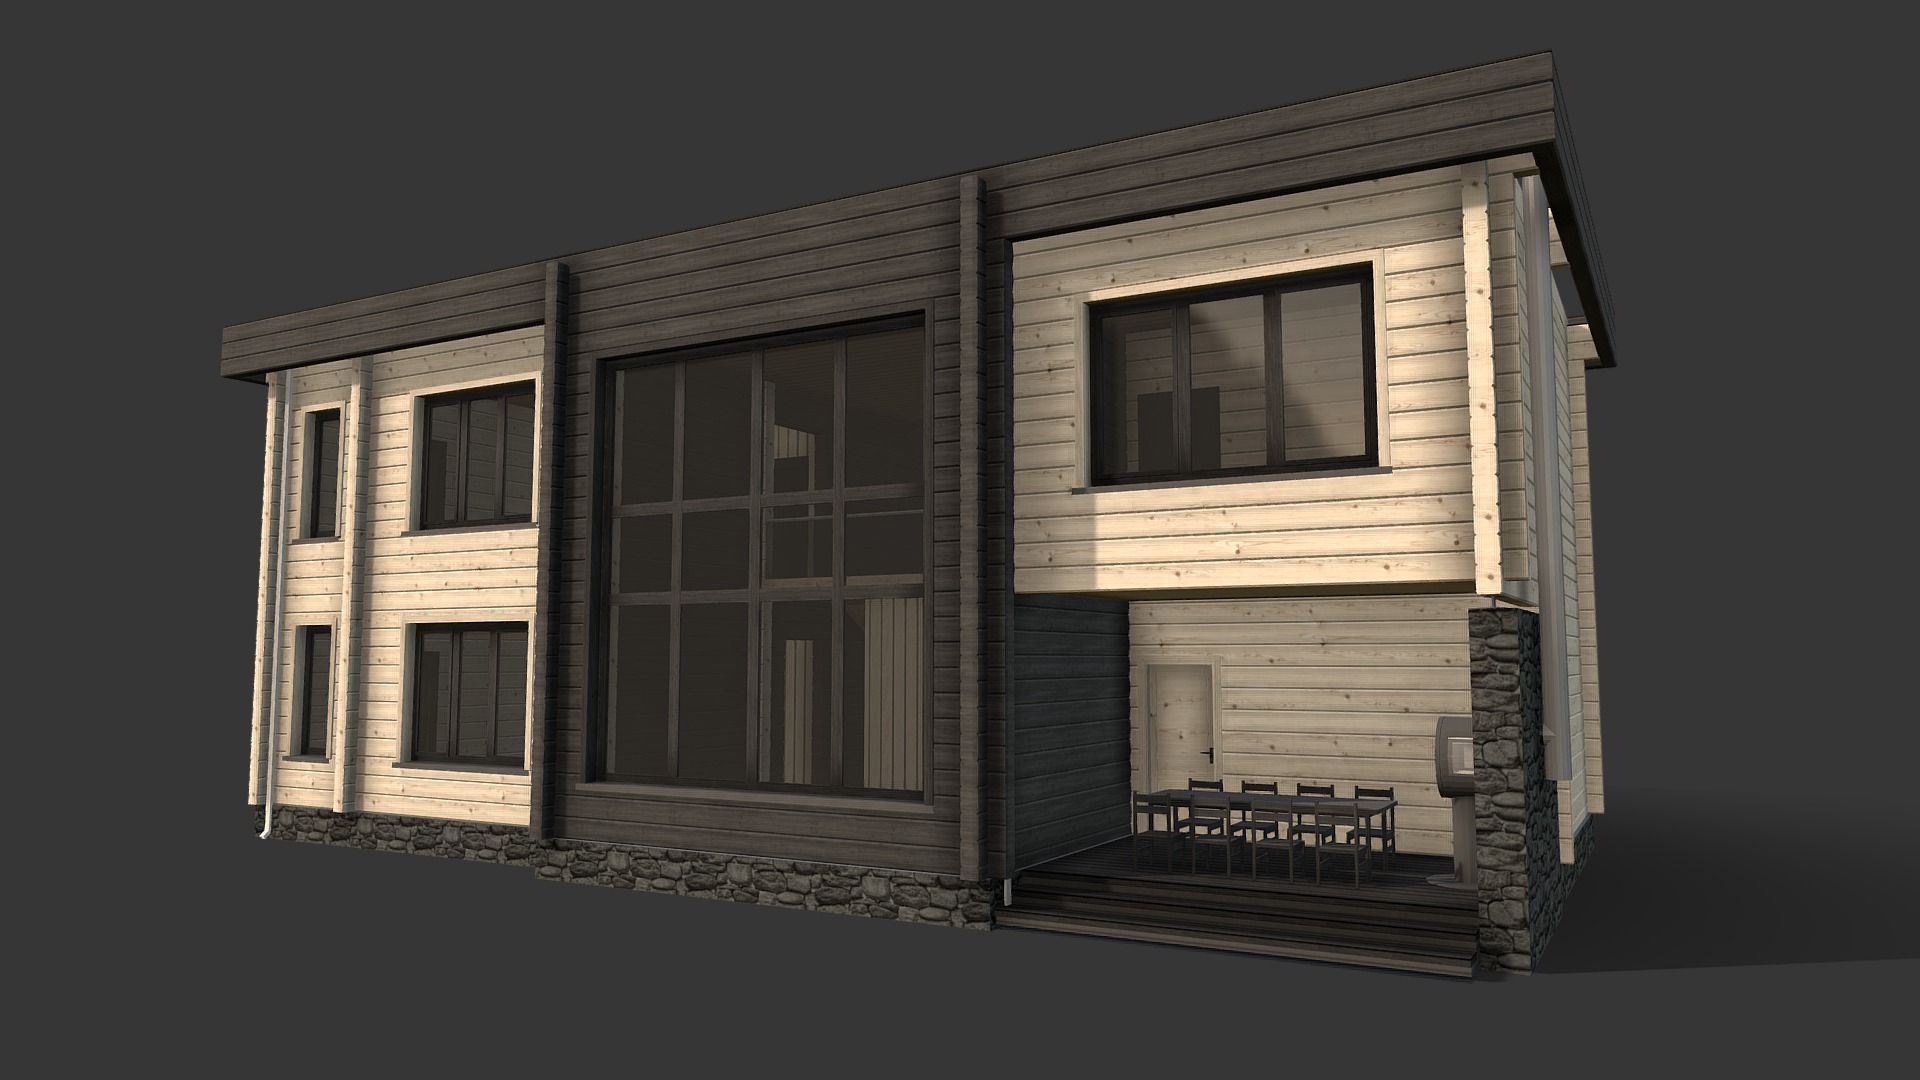 3D model Проект дома_1.0 - This is a 3D model of the Проект дома_1.0. The 3D model is about a small house with a porch.